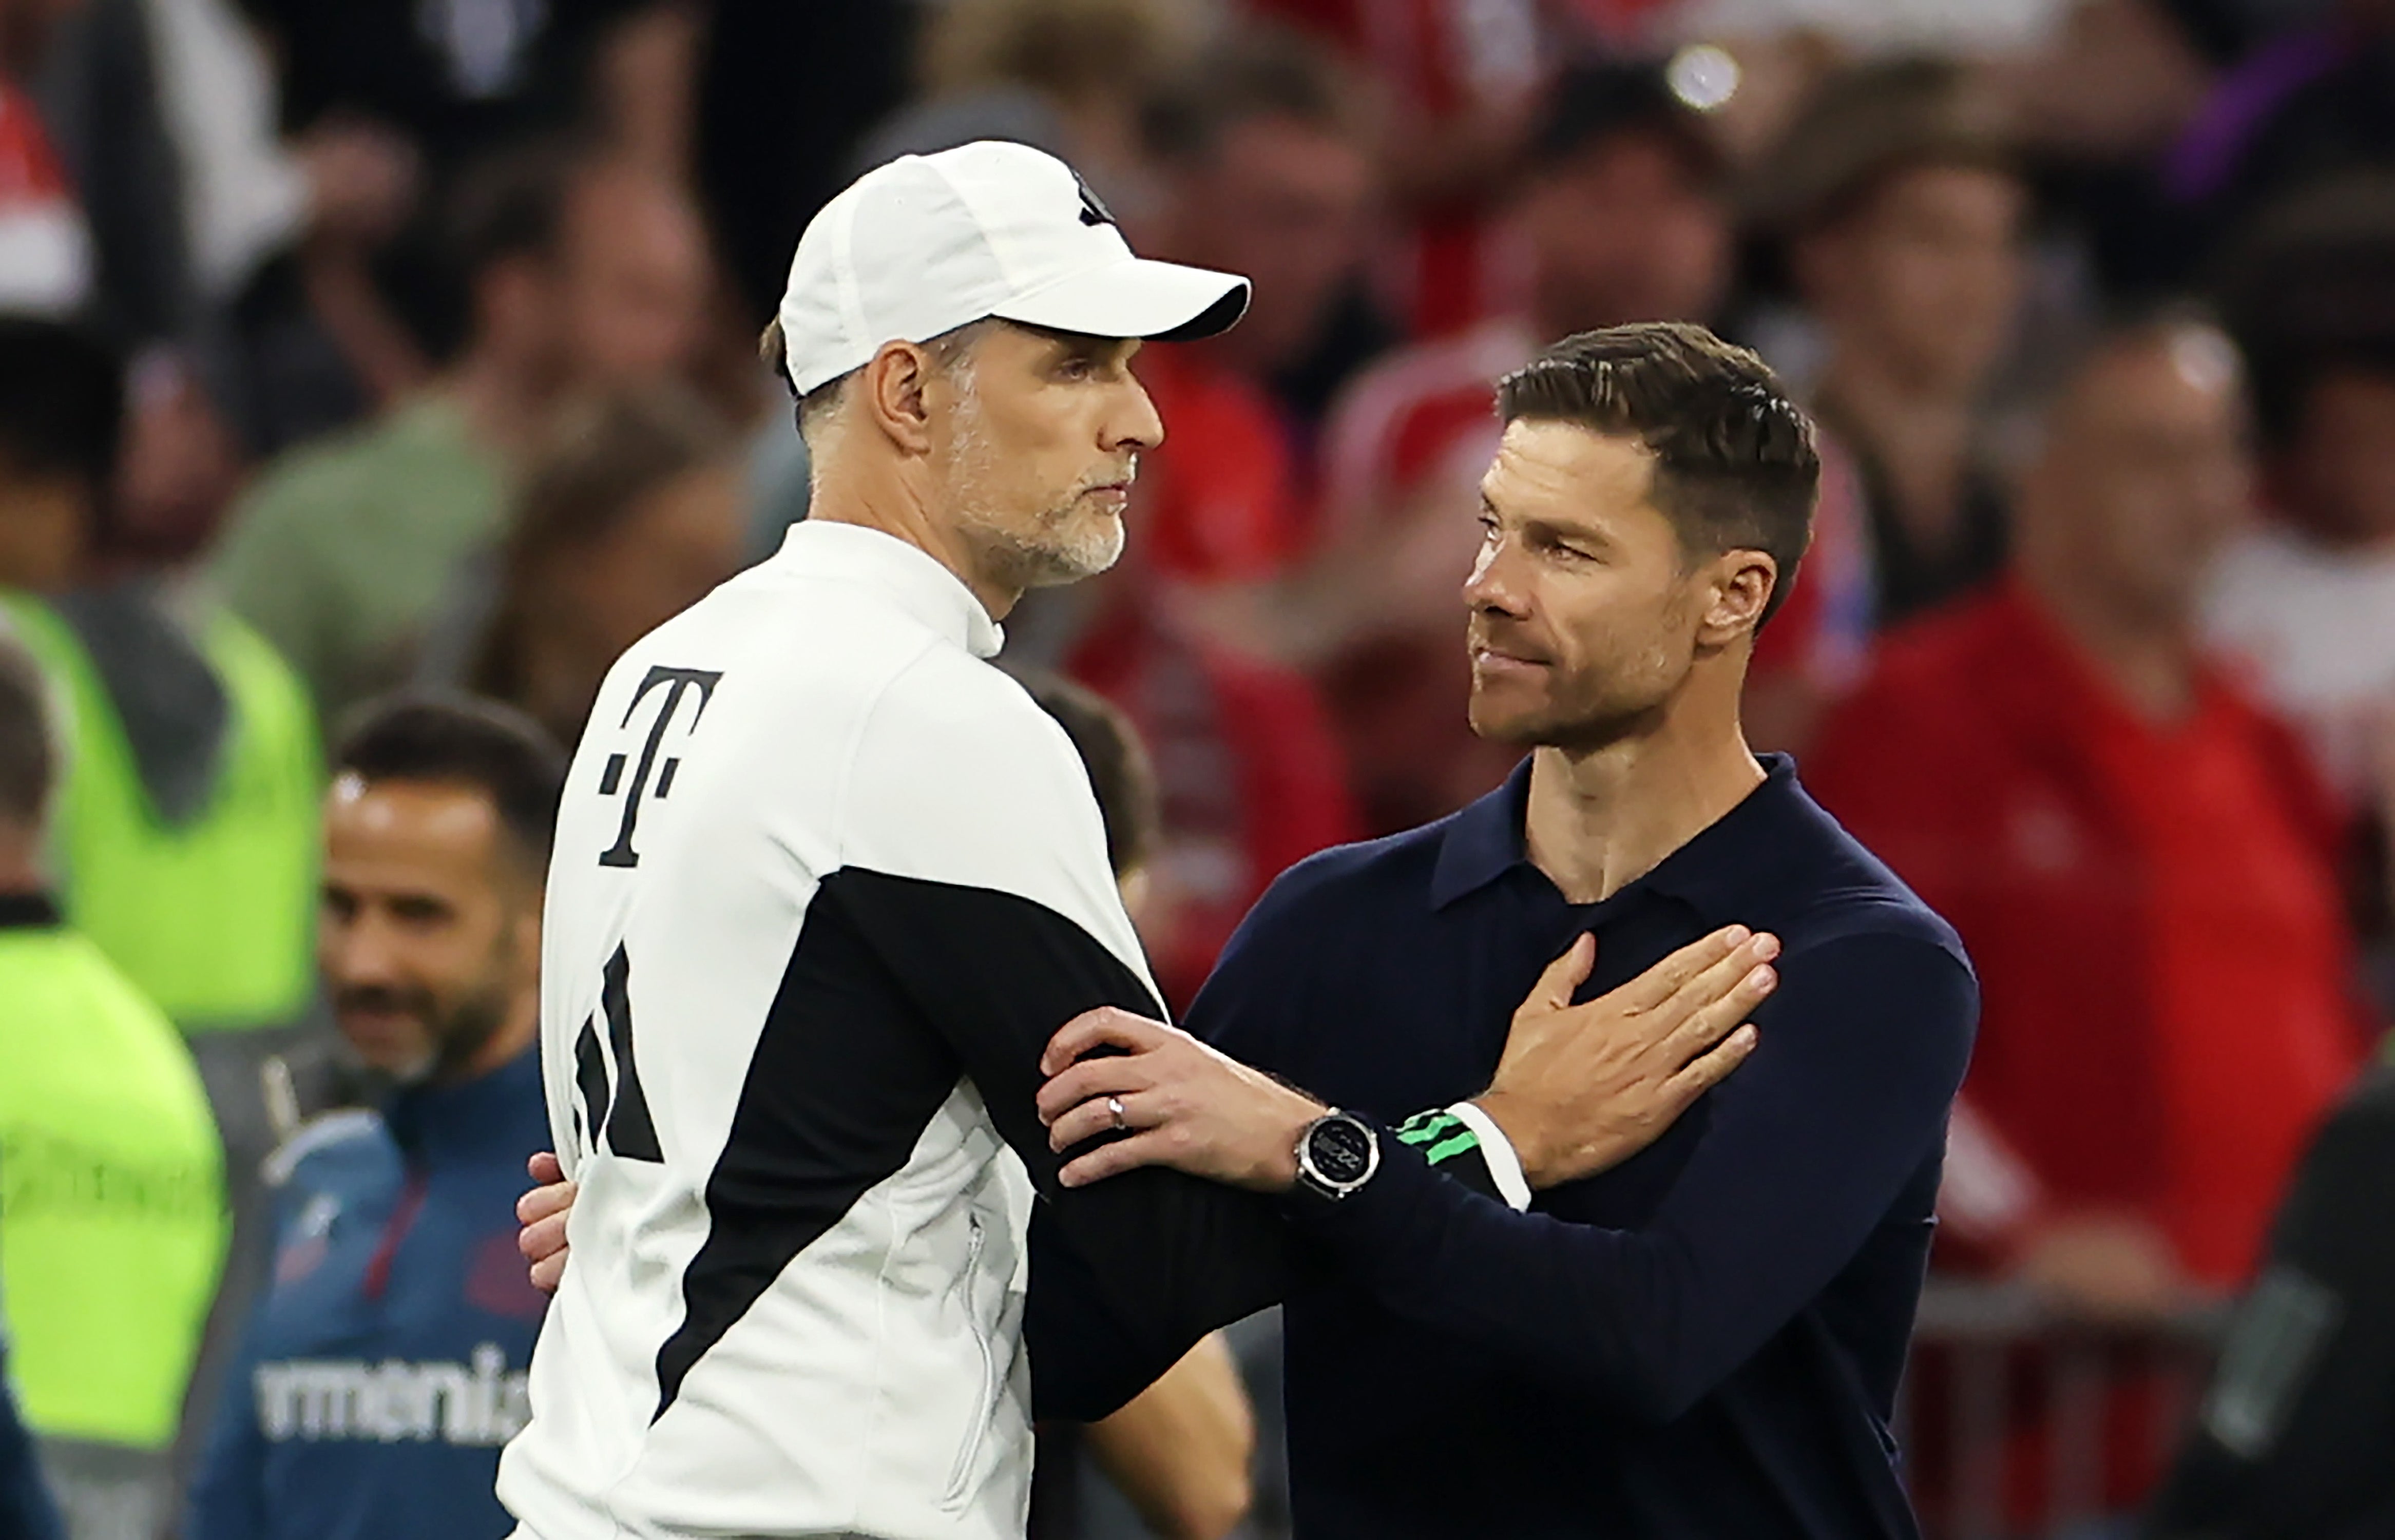 Tuchel is consoled by Xabi Alonso after defeat by Leverkusen